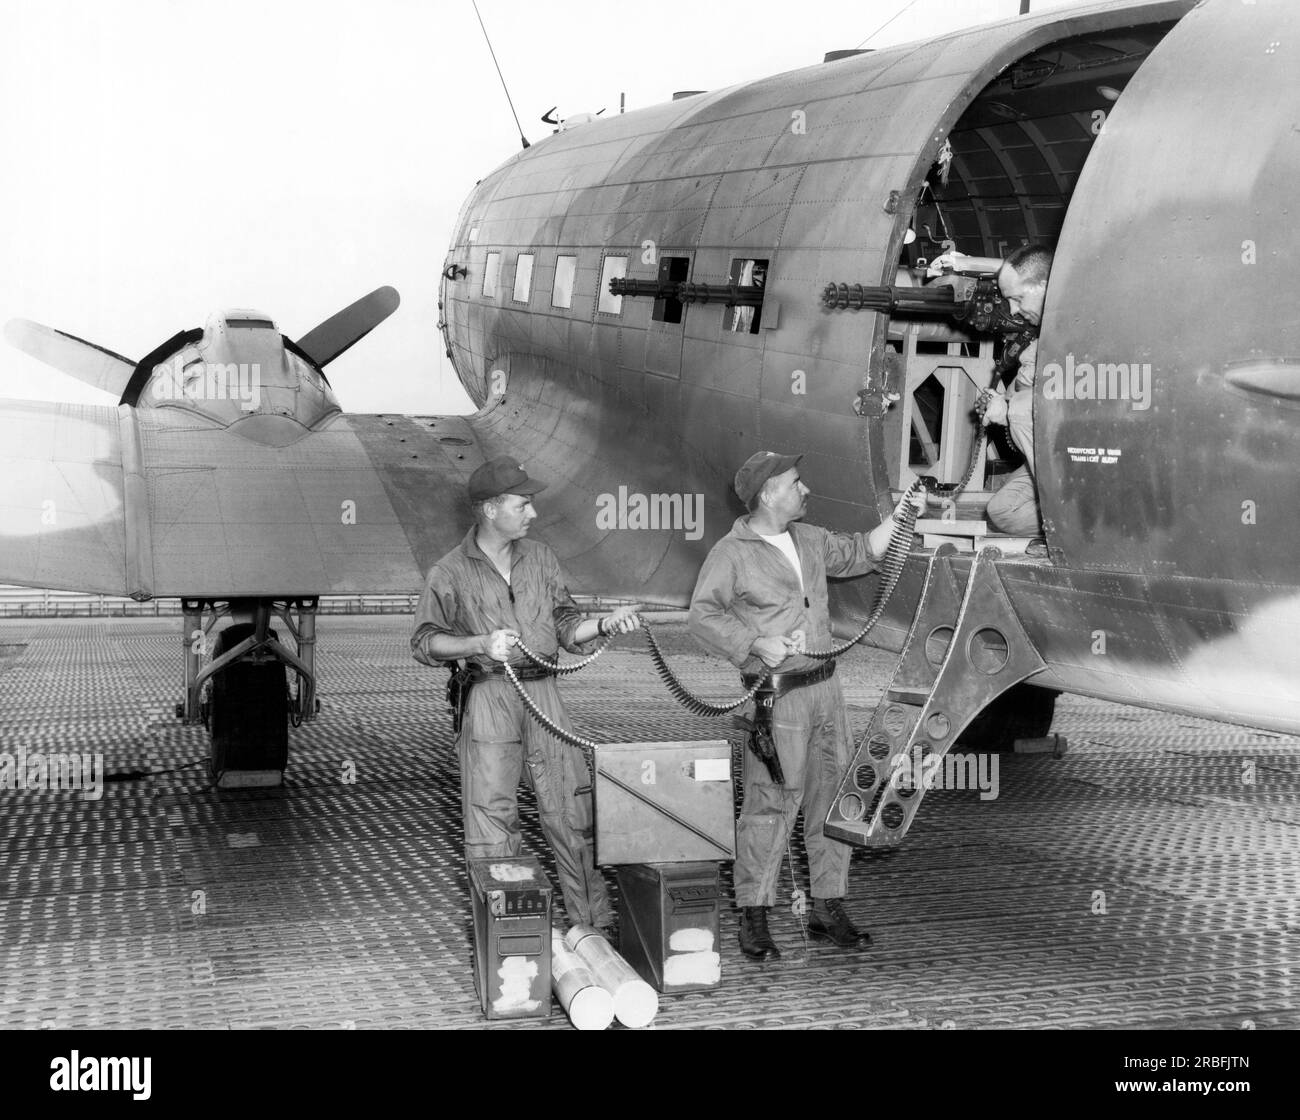 Saigon, Vietnam:  1966 Airmen loading ammunition into one of the three 7.62mm cannons that are mounted on the side of an Air Force Douglas AC-47 Dragon ship. The cannons fire up to 18,000 rounds per minute, and the flares, flames and red phosphorus coming from the gunship were so awesome that the Viet Cong callled them Dragon Ships. Stock Photo